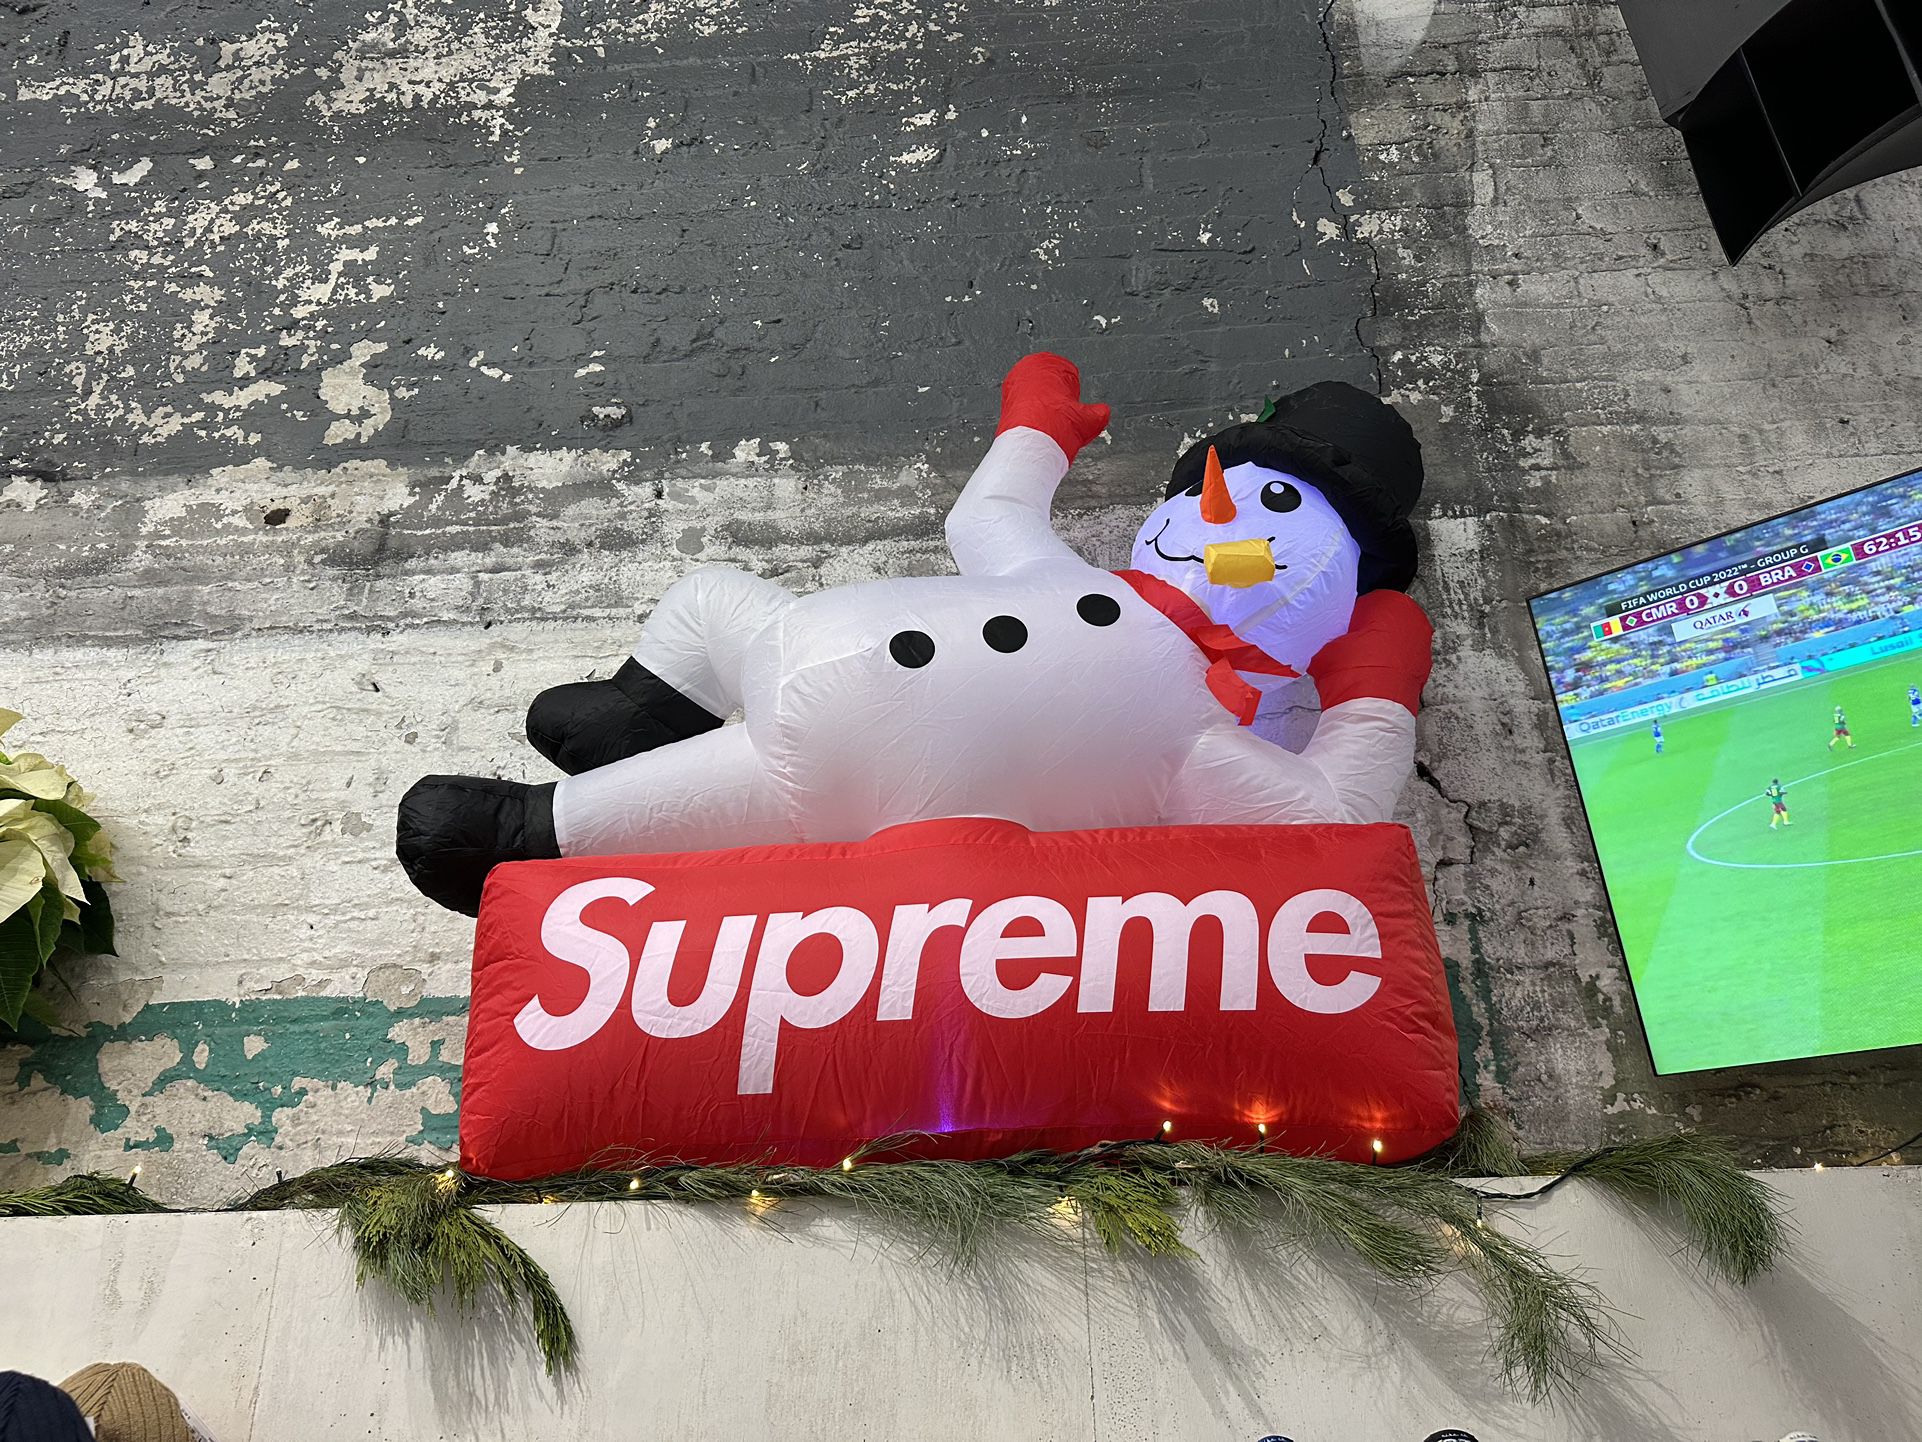 Supreme x Louis Vuitton Wallet Brand New for Sale in Queens, NY